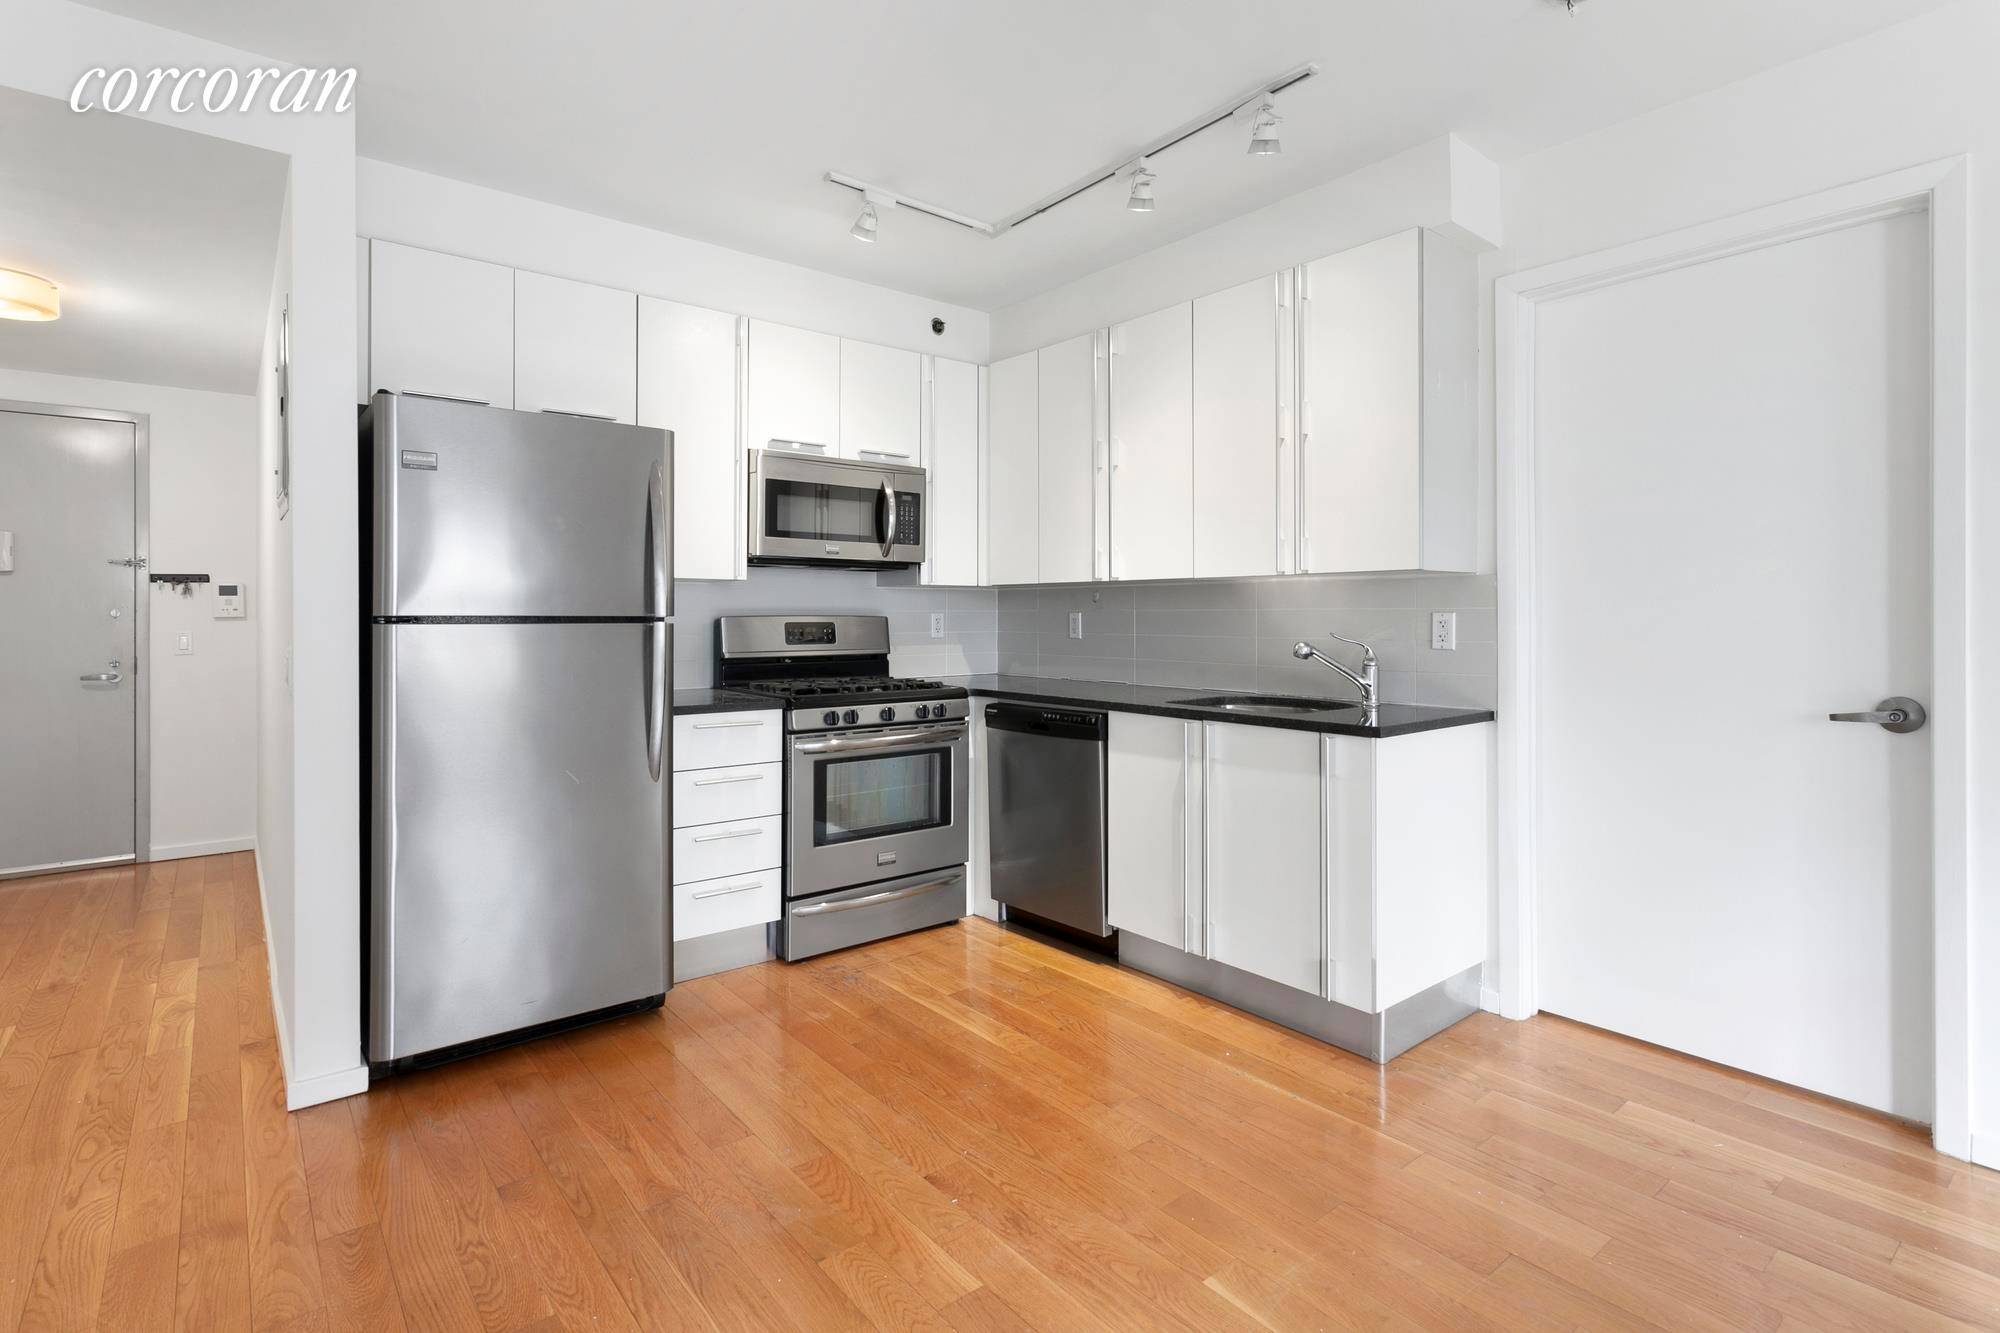 NEW ! No fee and 2 months free on this bright, high floor 2 bed 2 bath apartment !